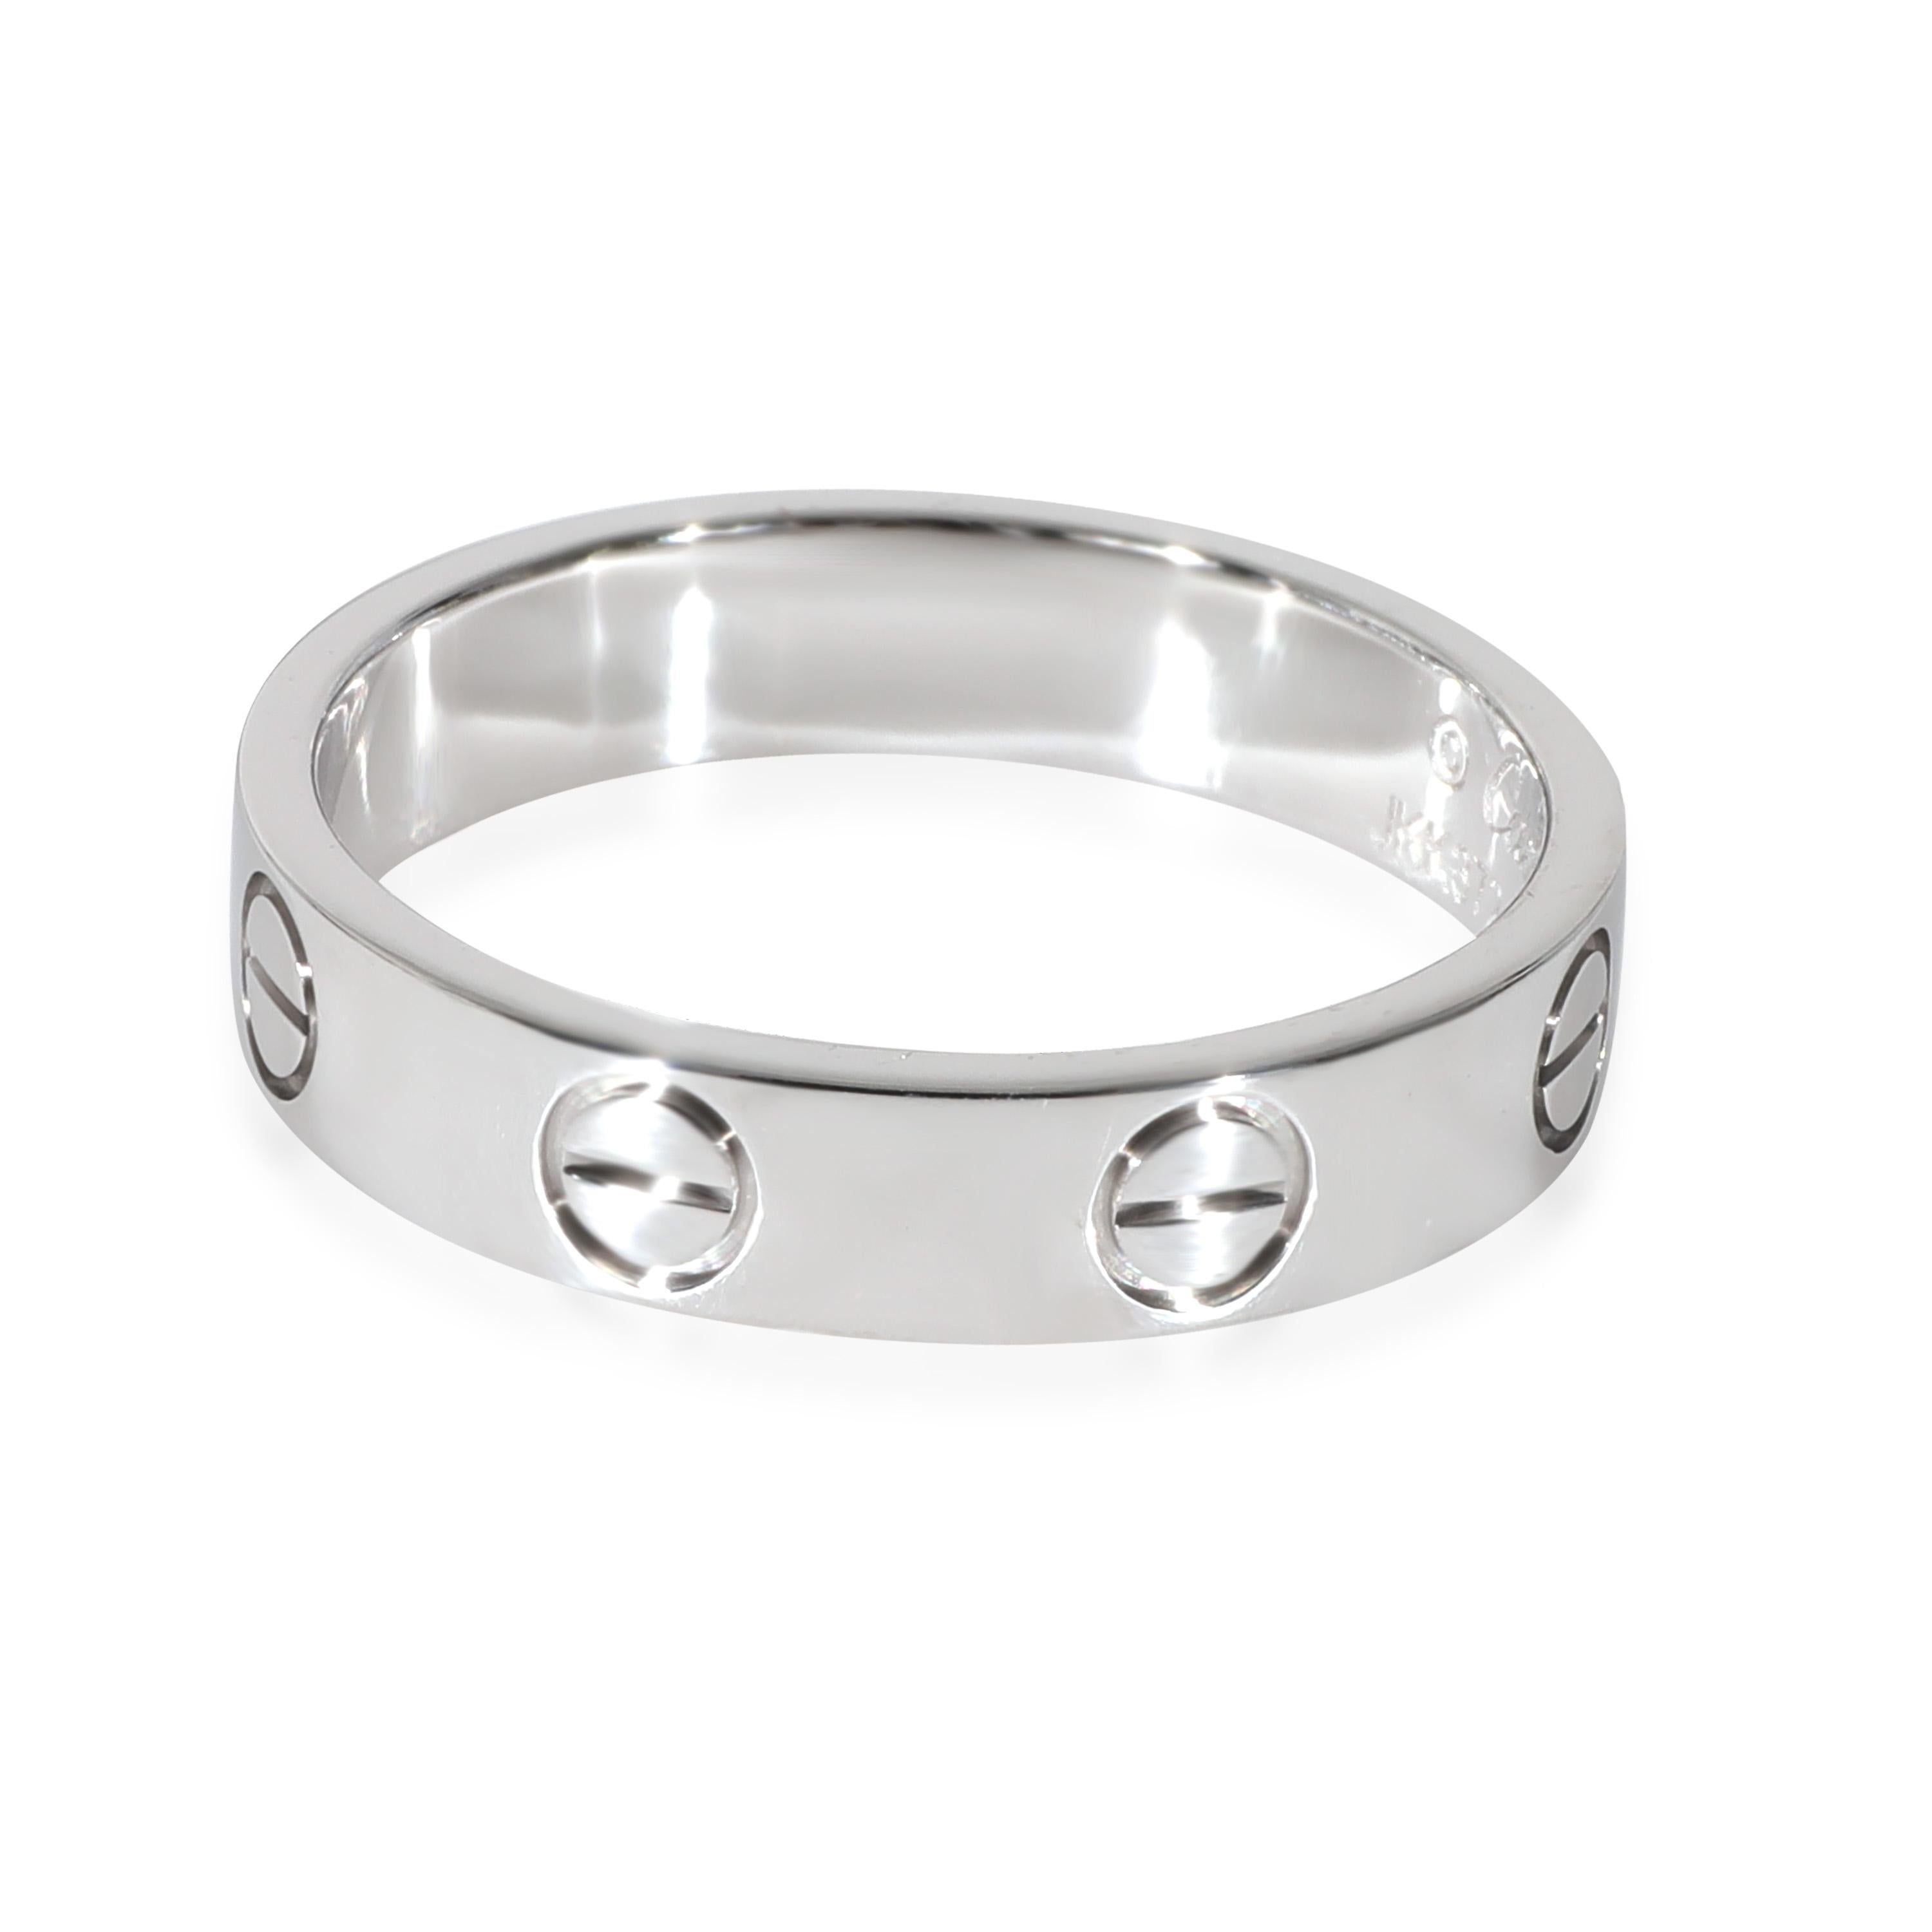 Cartier Love Wedding Band in 18k White Gold

PRIMARY DETAILS
SKU: 130006
Listing Title: Cartier Love Wedding Band in 18k White Gold
Condition Description: Cartier's Love collection is the epitome of iconic, from the recognizable designs to the